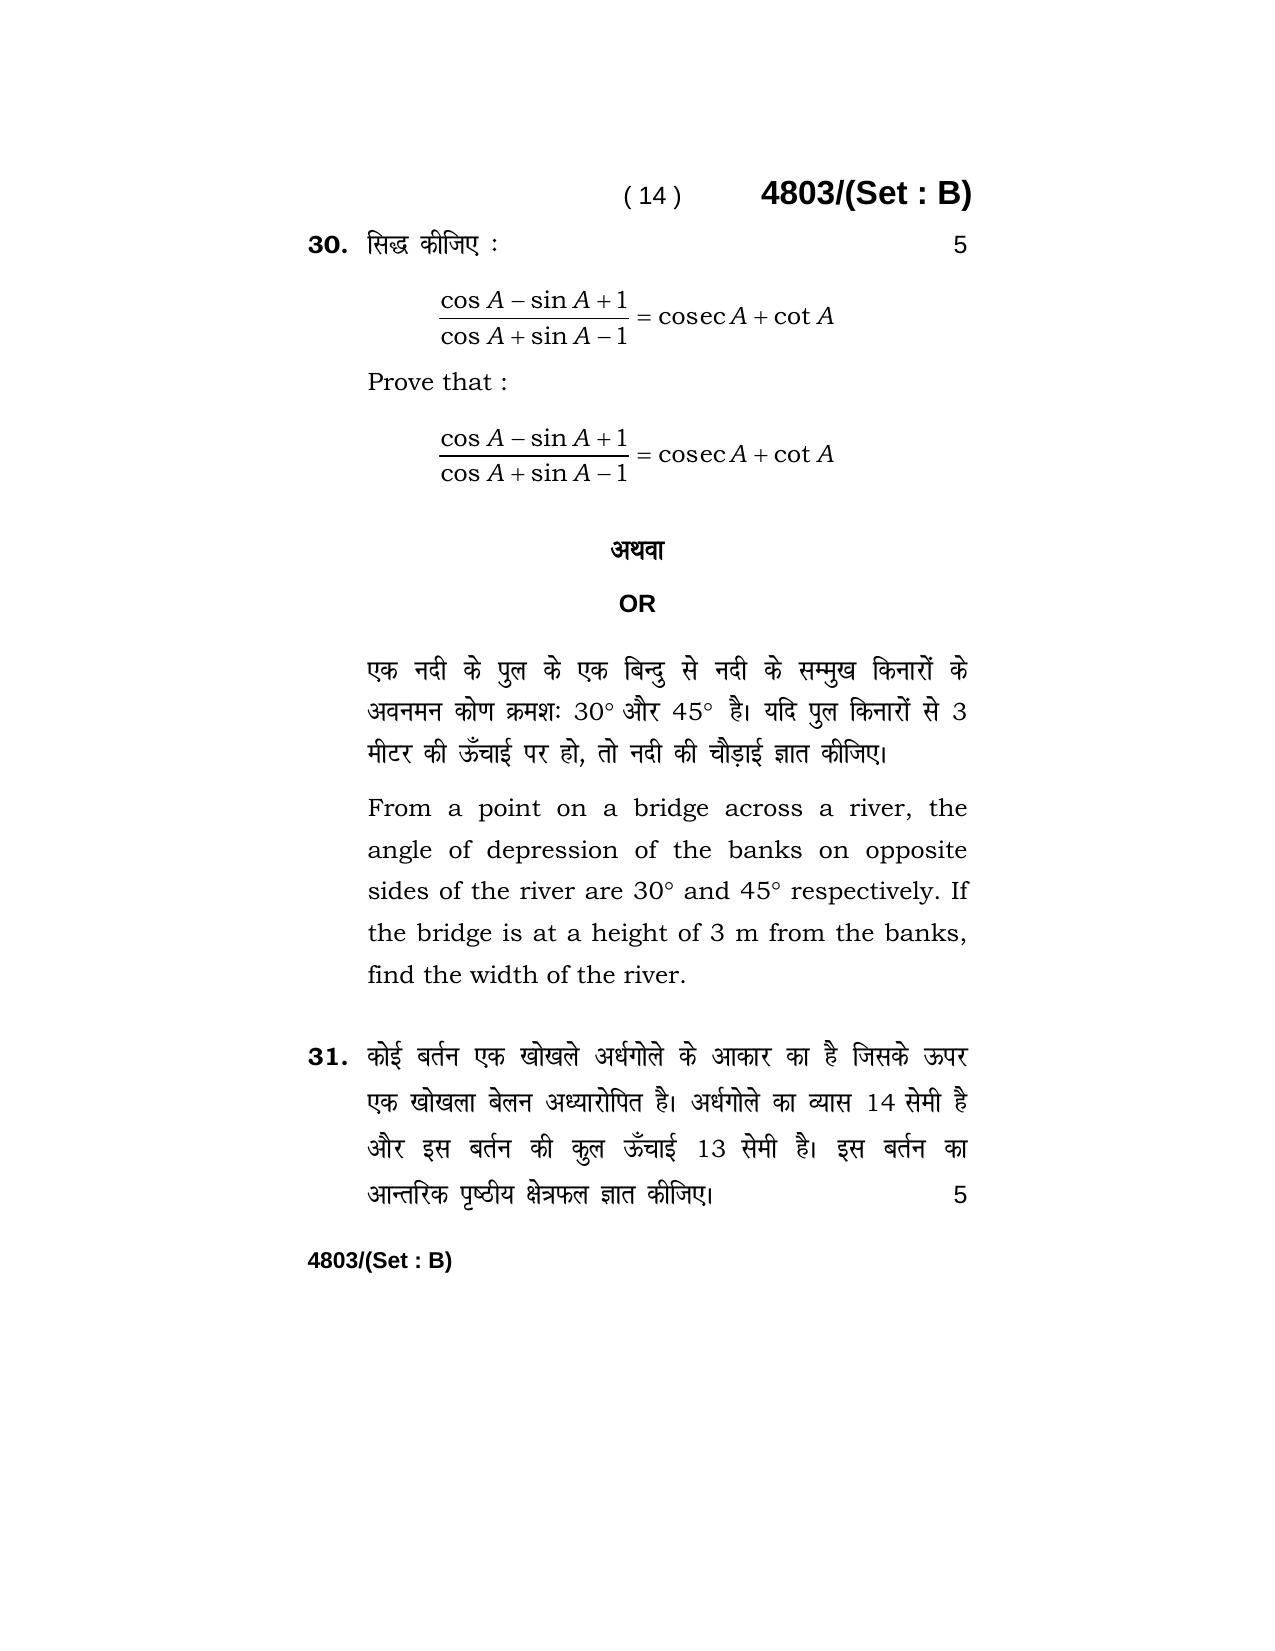 Haryana Board HBSE Class 10 Mathematics 2020 Question Paper - Page 30